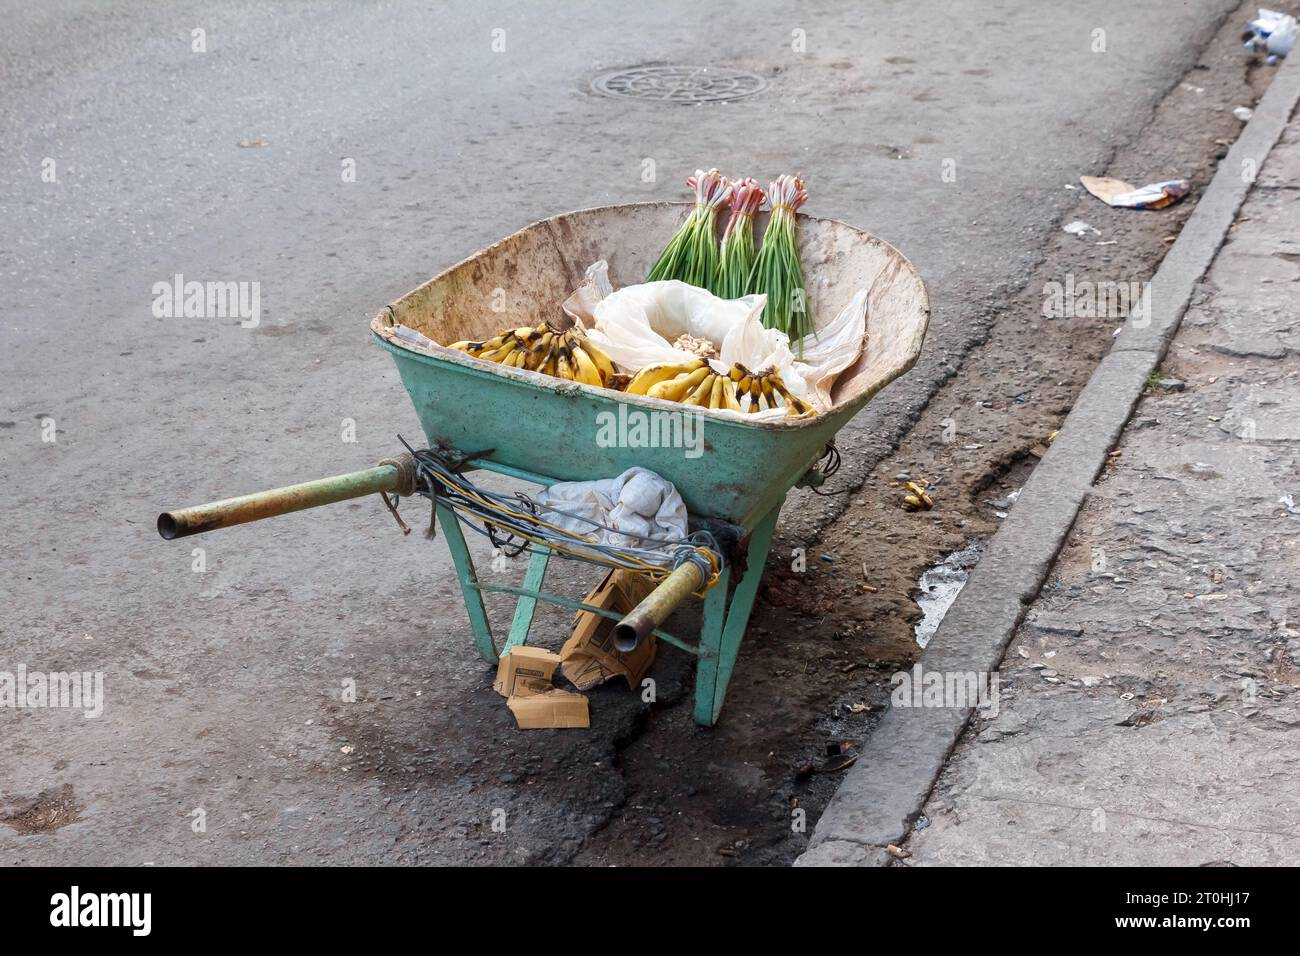 A wheelbarrow with fruit and spices for sale. The object is stationary by the dirty curb of a city street. The sidewalk is damaged. Stock Photo